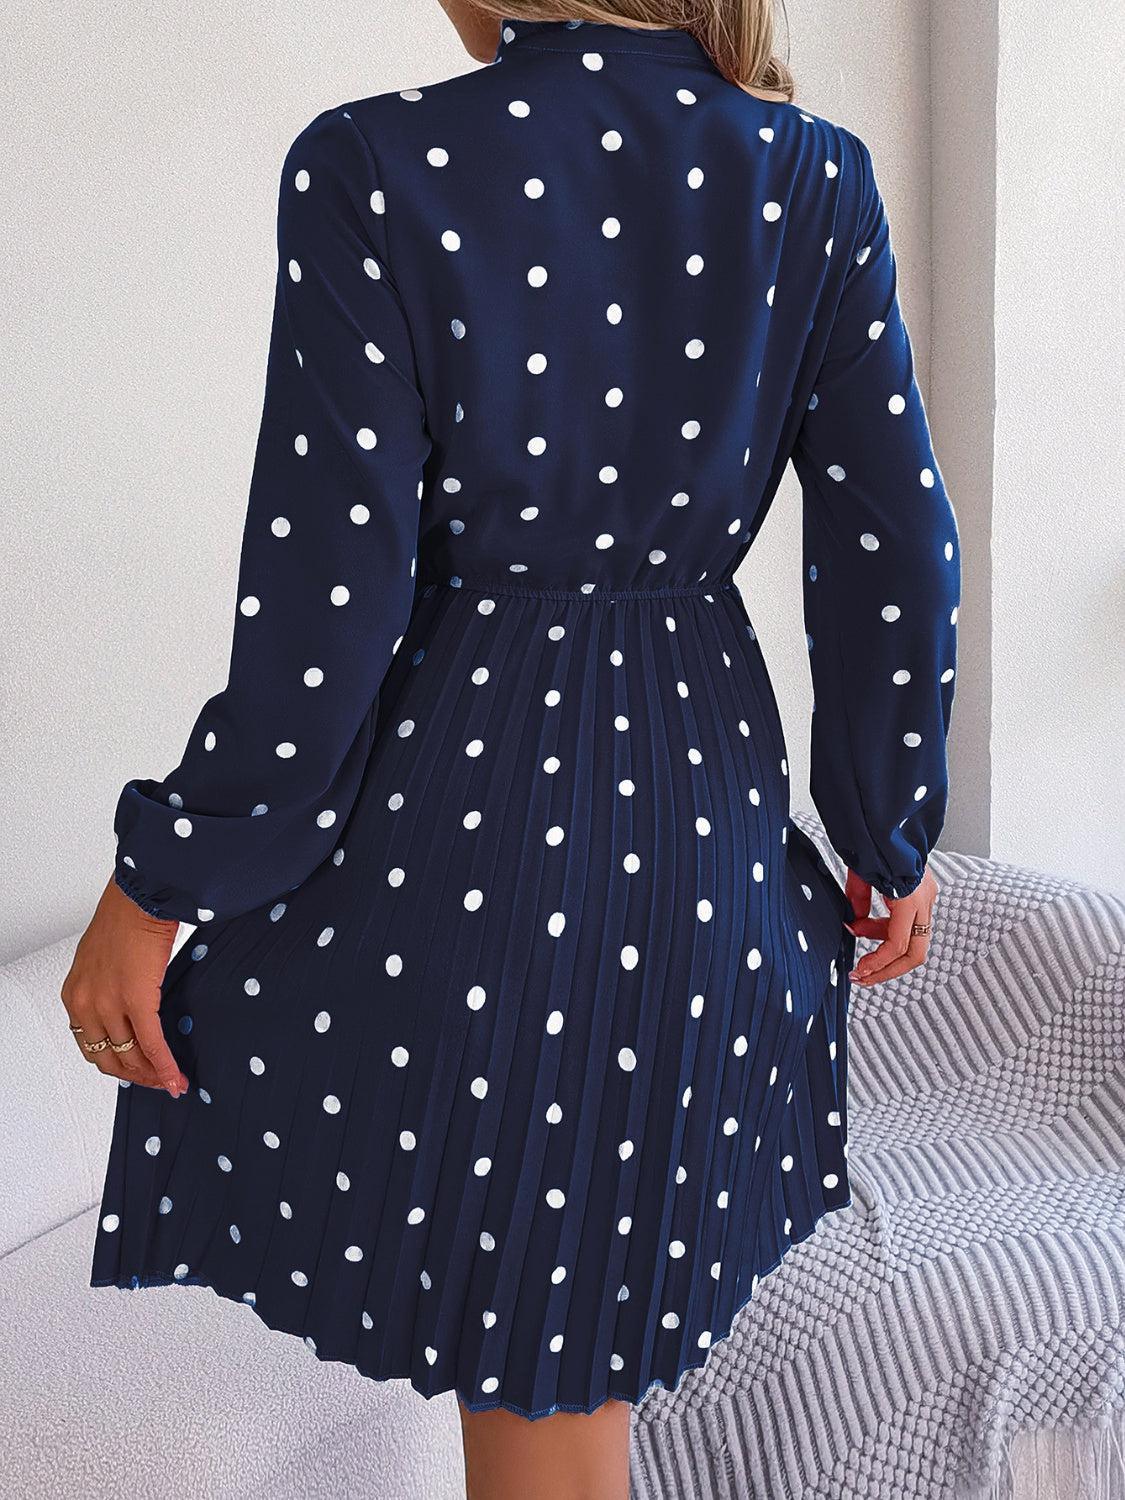 a woman in a blue dress with white polka dots